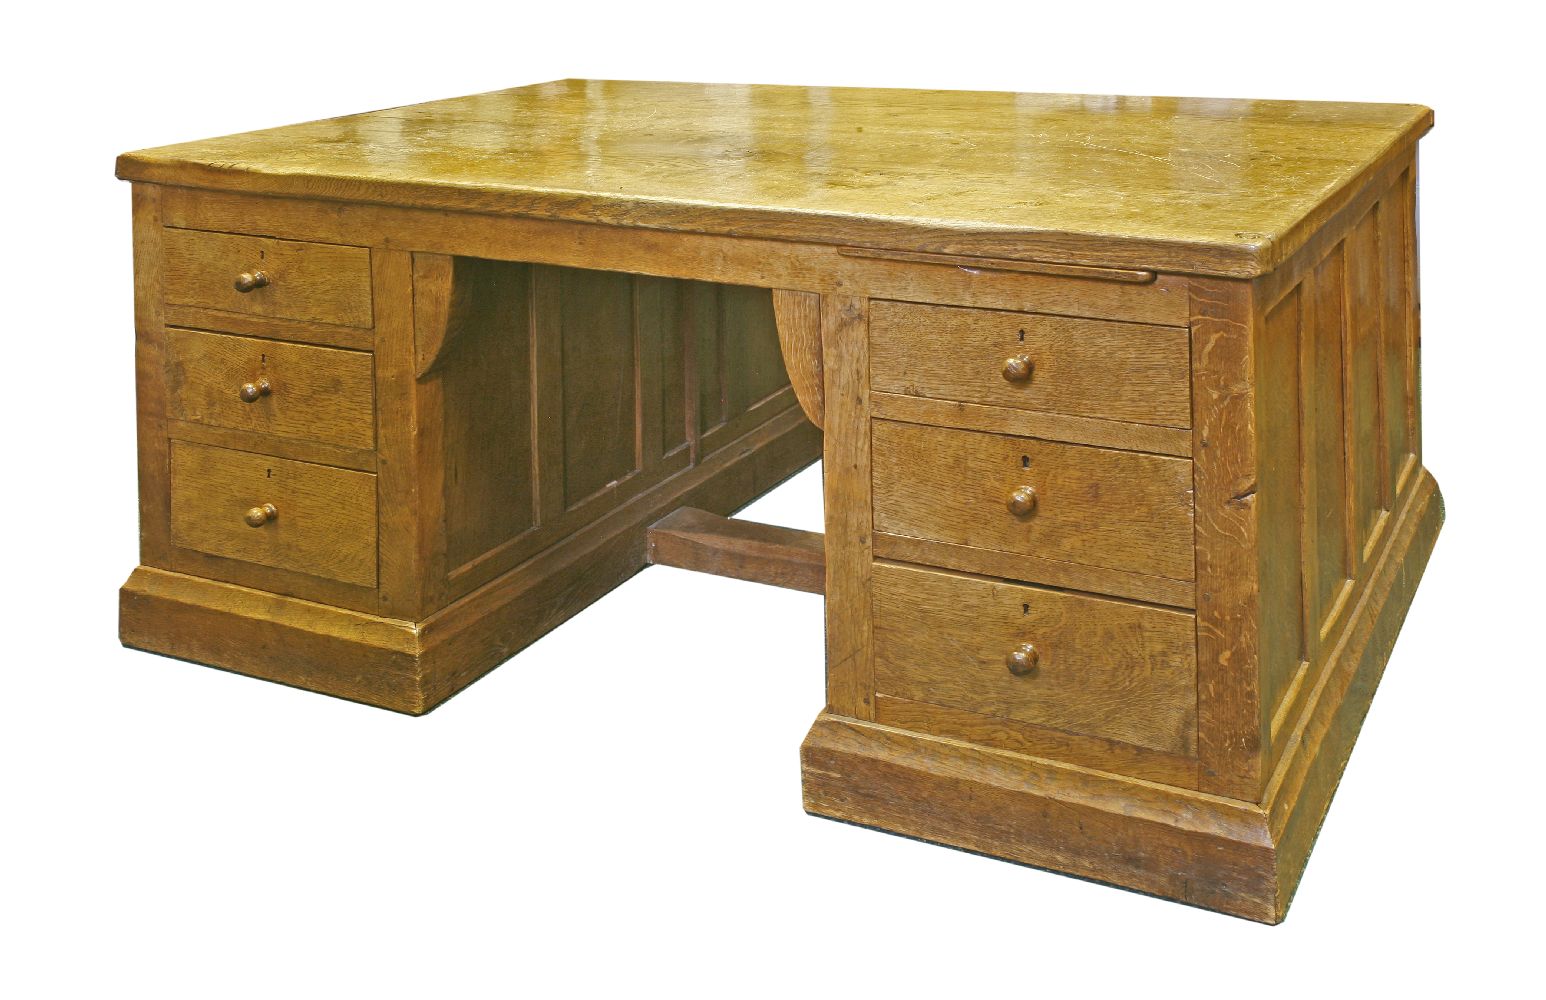 A Robert ‘Mouseman’ Thompson oak partners' desk,with an adzed top and scrolled corners with three